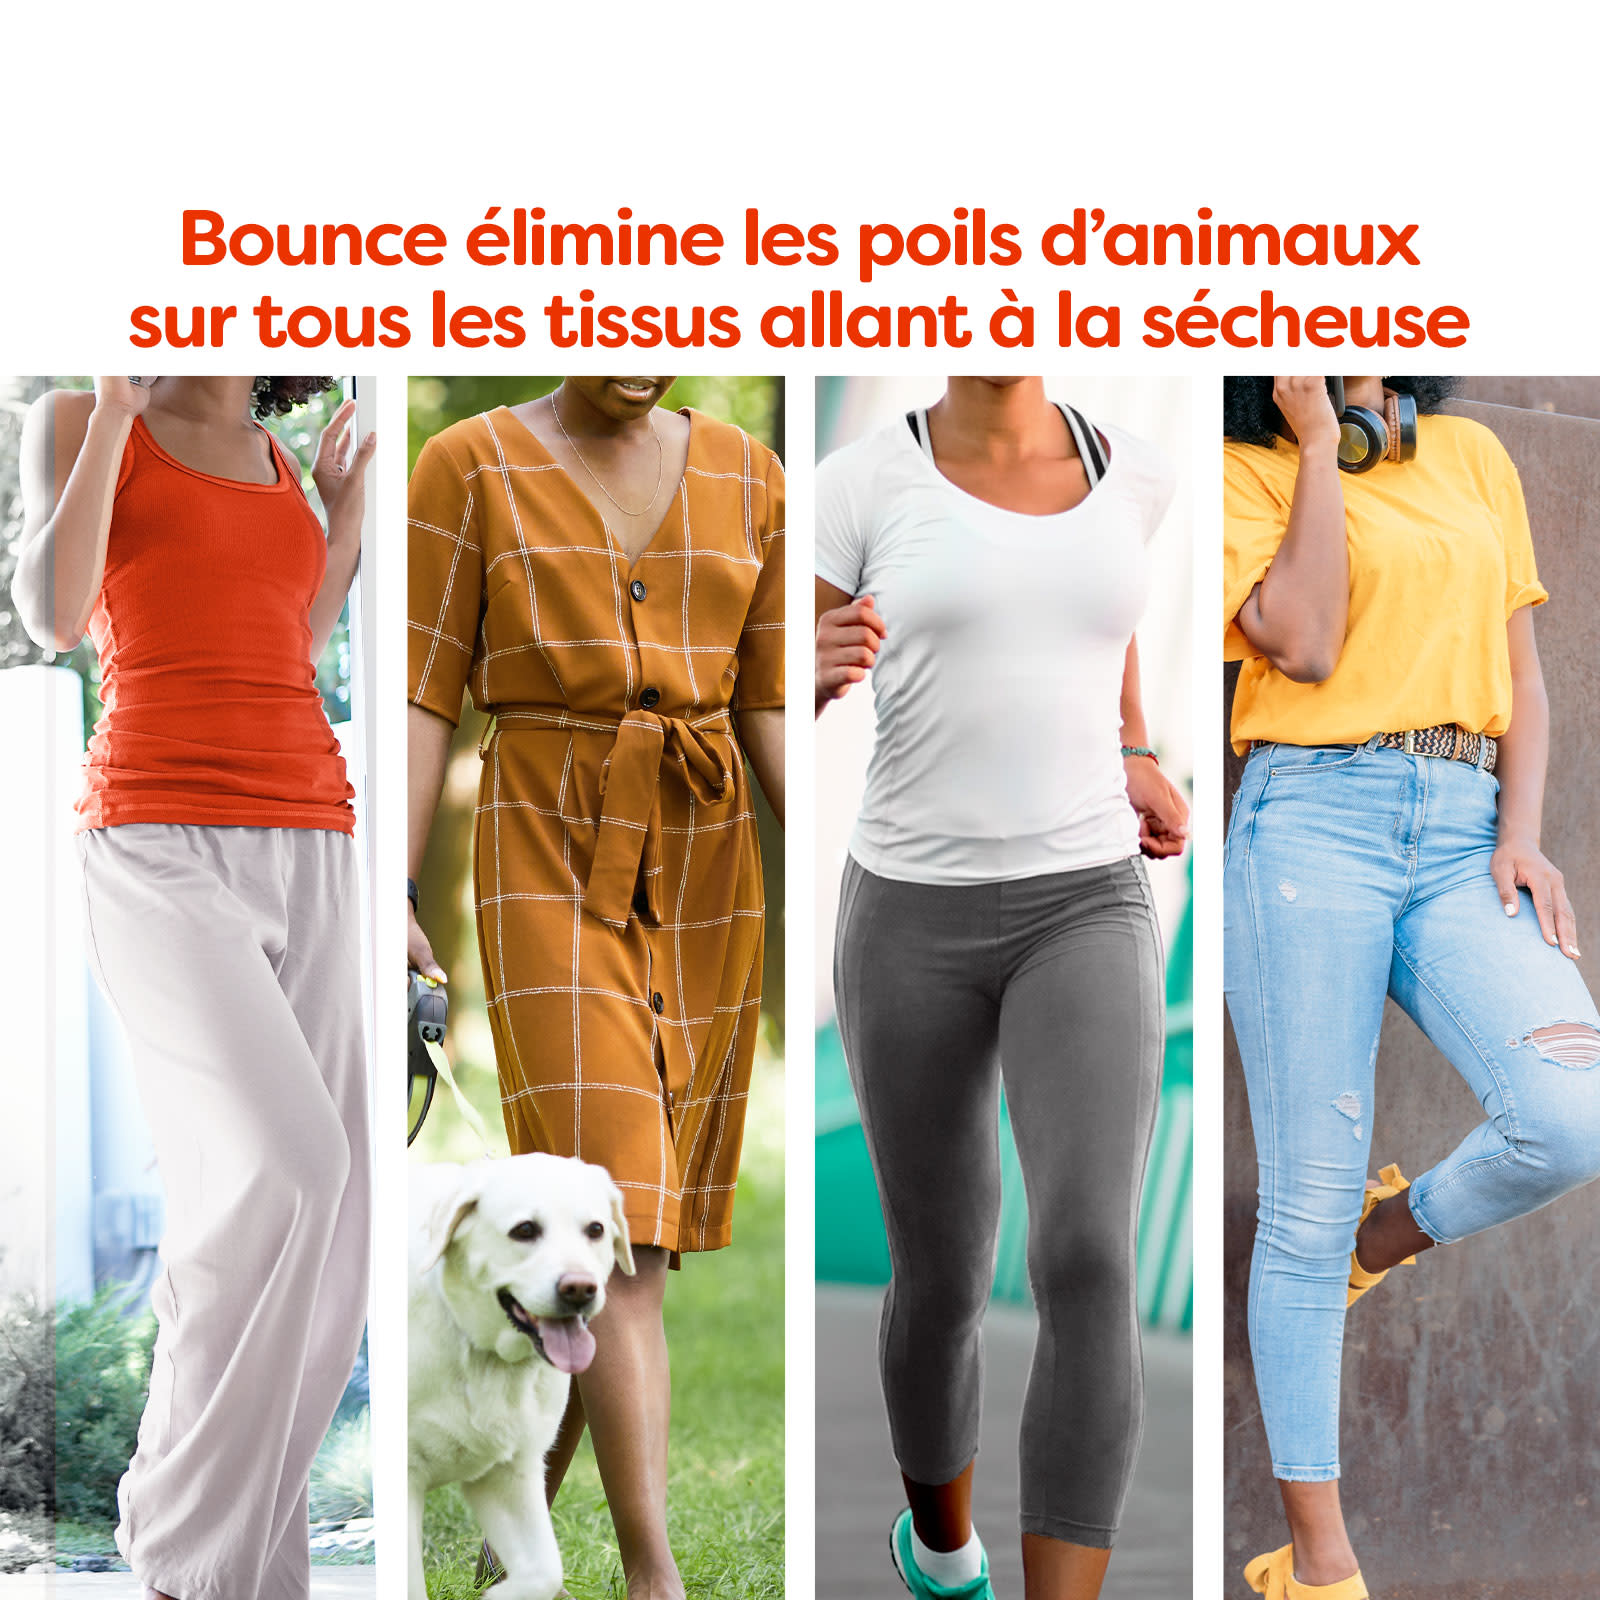 Bounce Pet Hair Dryer Sheets: For dryer-safe fabrics, Bounce out pet hair